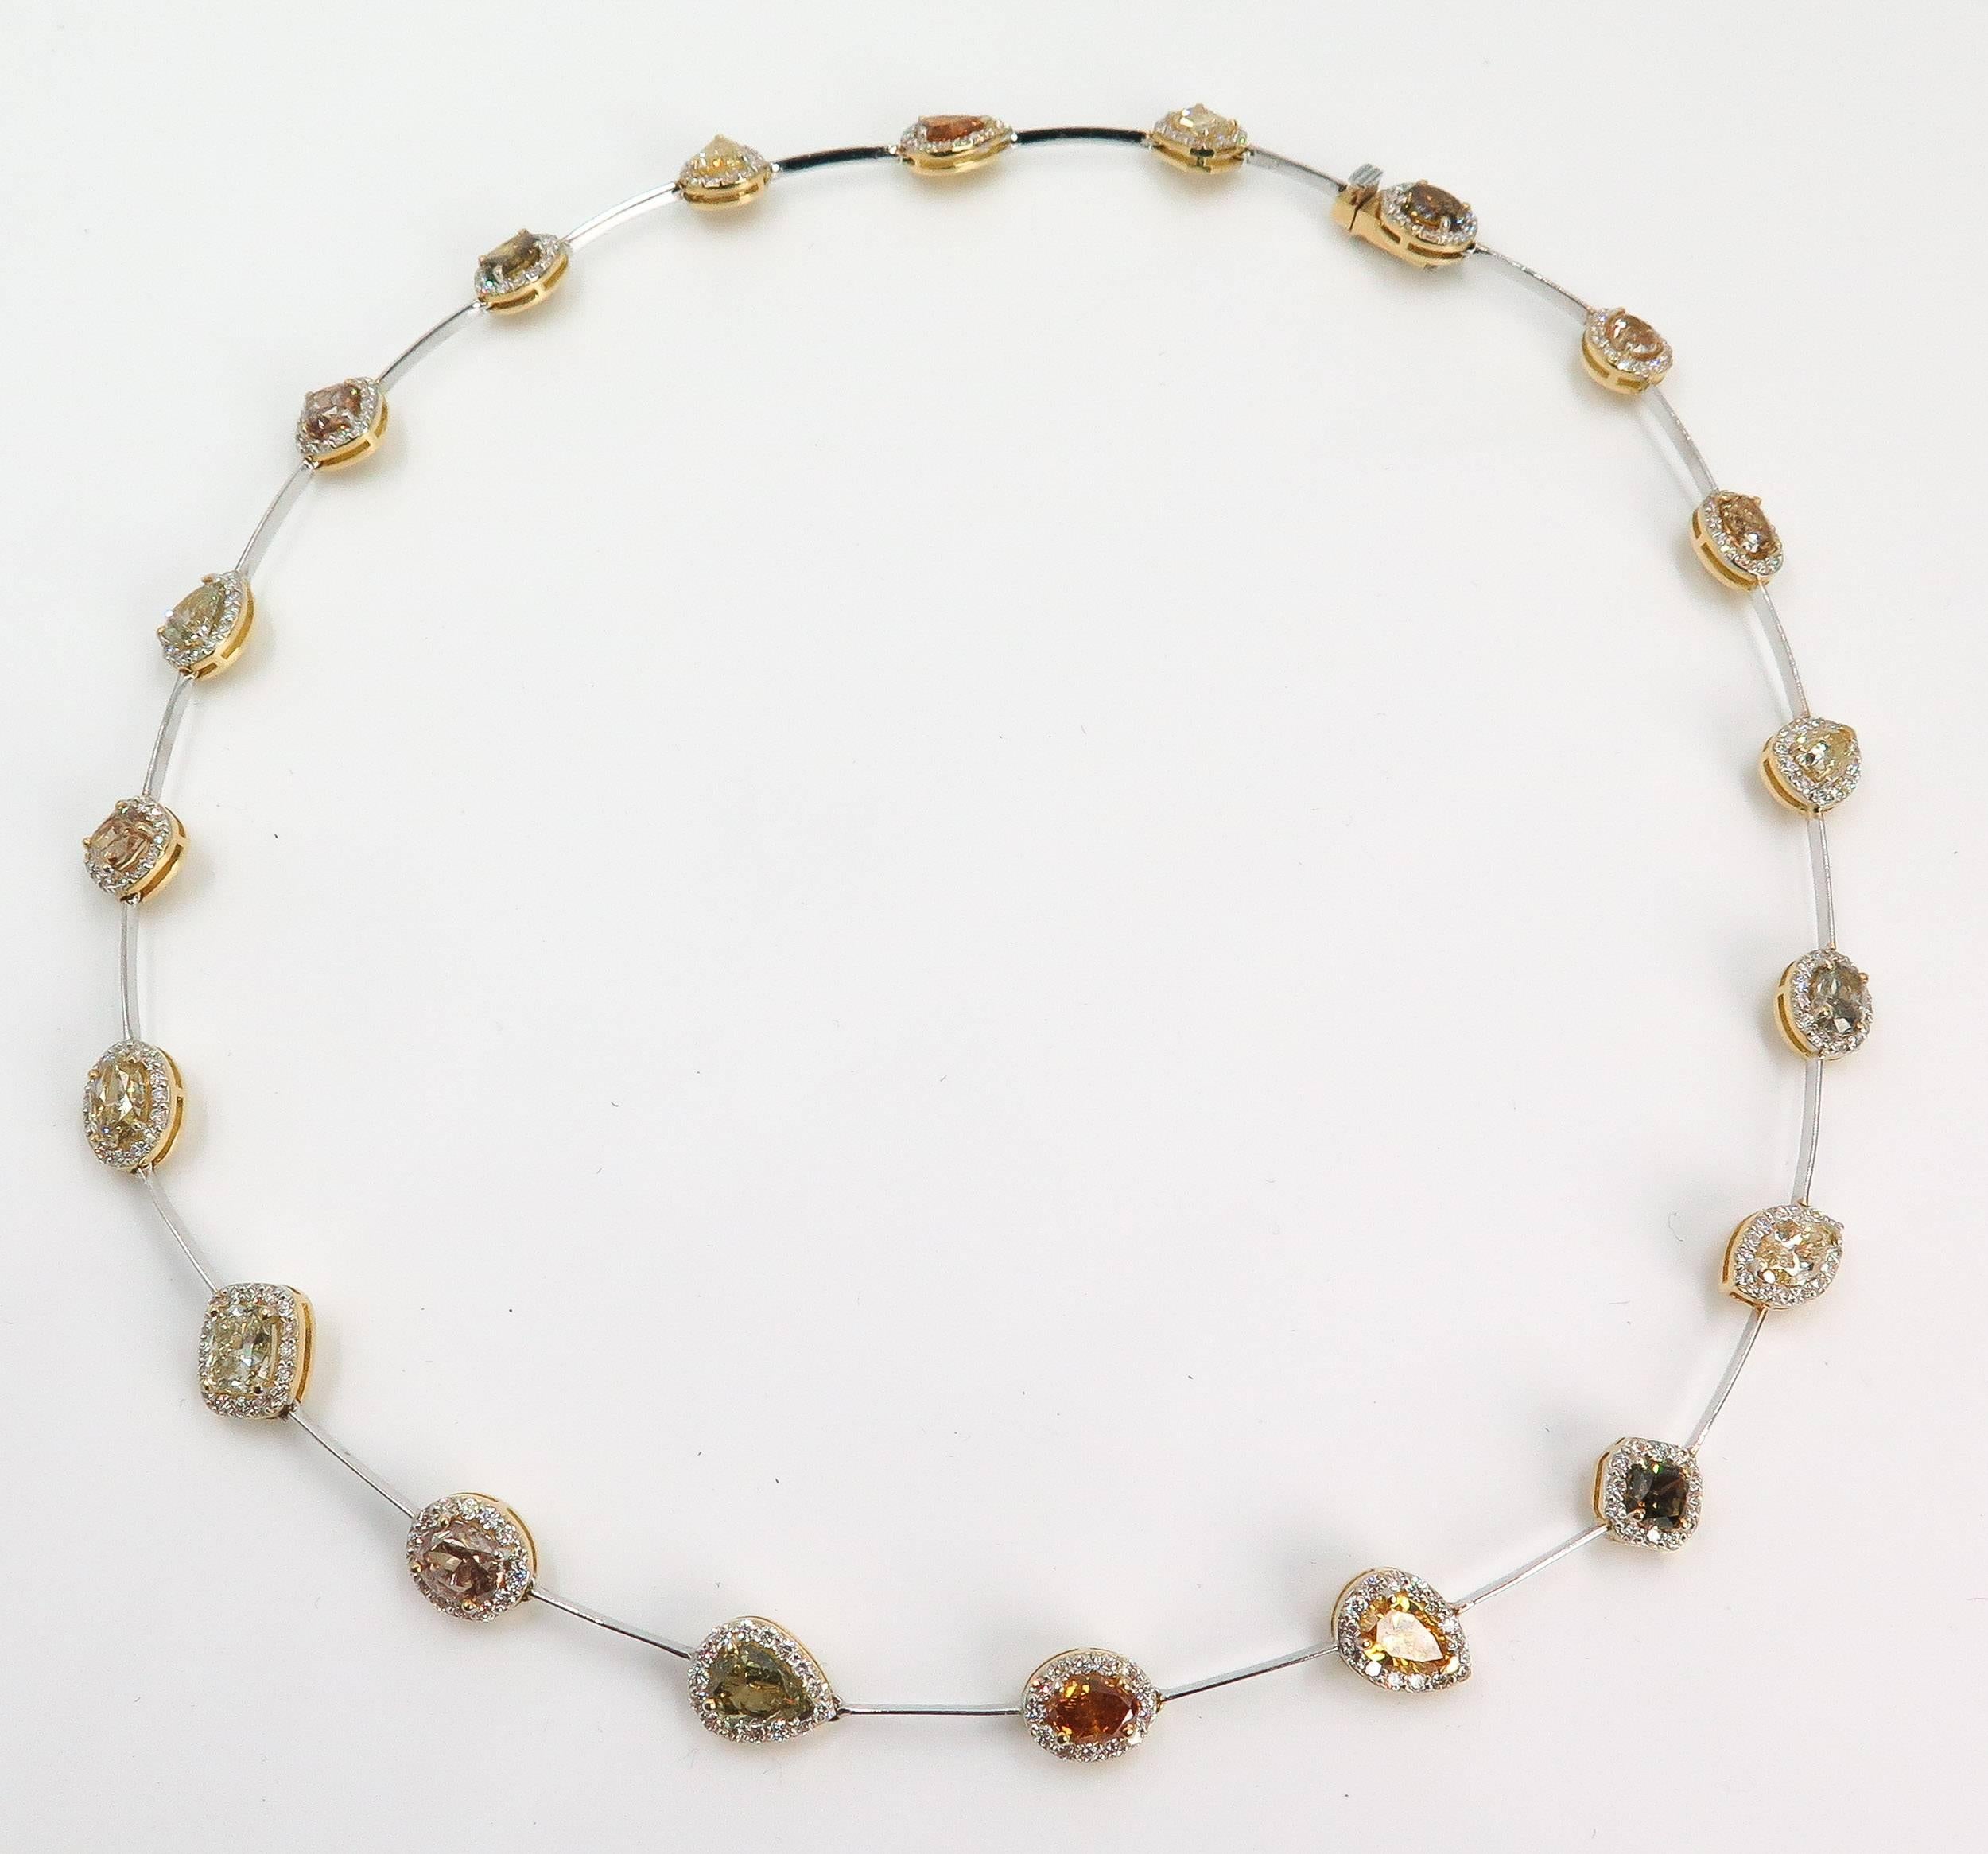 Stunning necklace composed of 20 natural fancy colored diamonds in different shapes, weighing 16.98 carats surrounded by round brilliant cut diamond halo and handcrafted in 18 karat white and yellow gold. 
Scientists believe these exquisite gems are